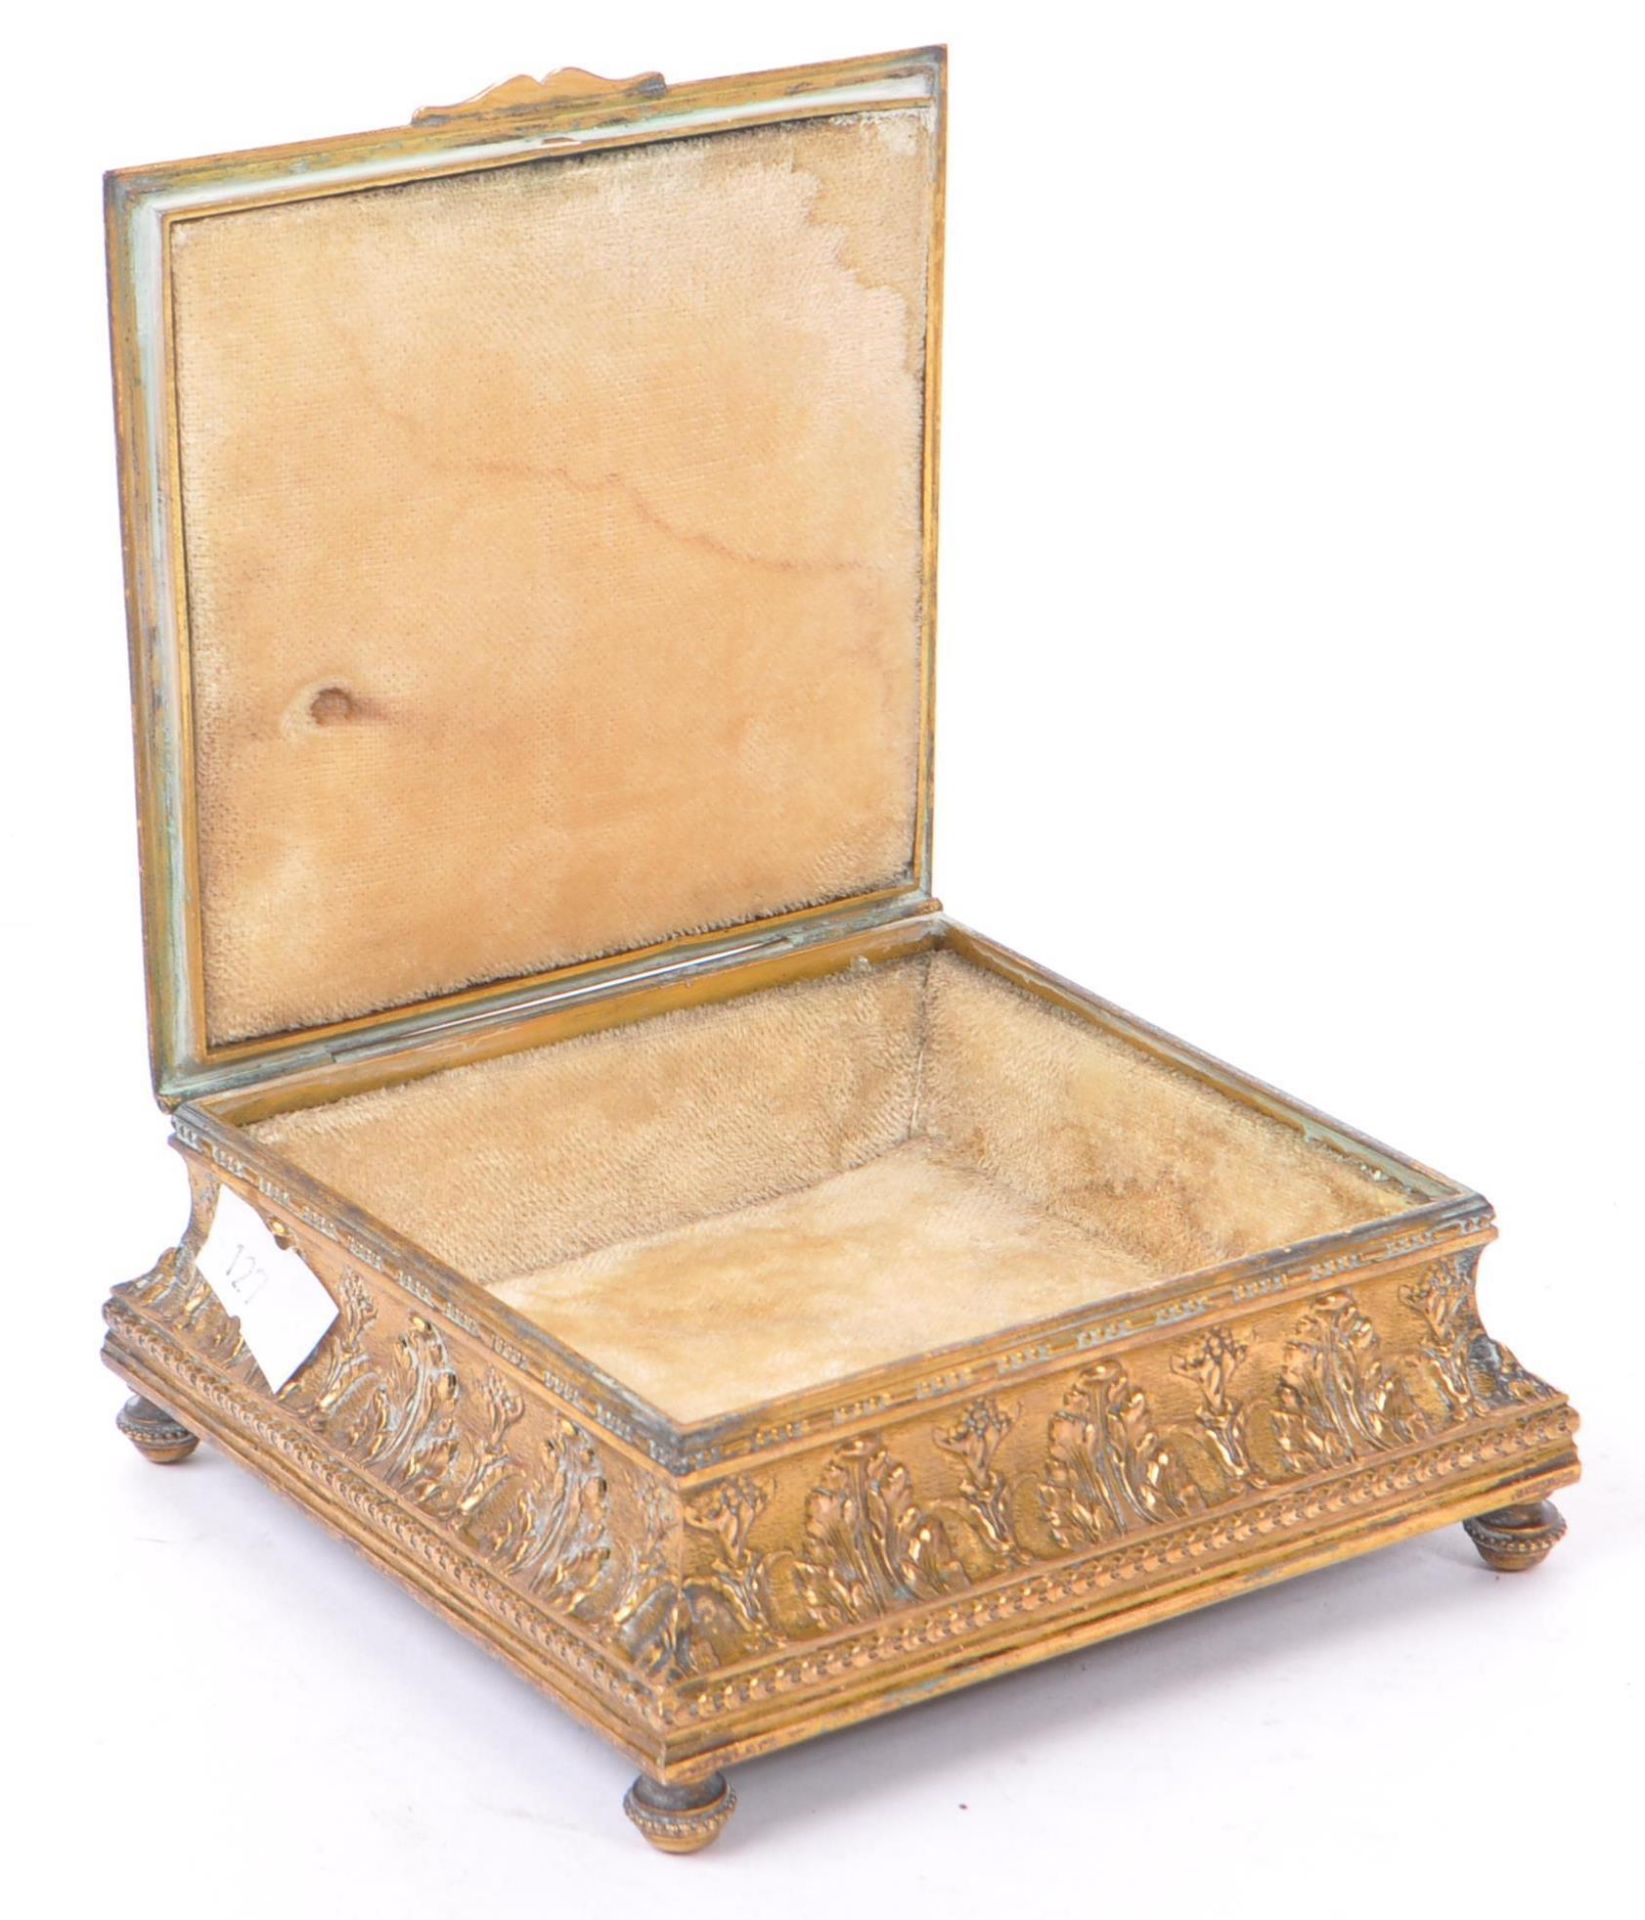 19TH CENTURY FRENCH JEWELLERY BOX WITH ROCOCO SCENE - Image 4 of 6